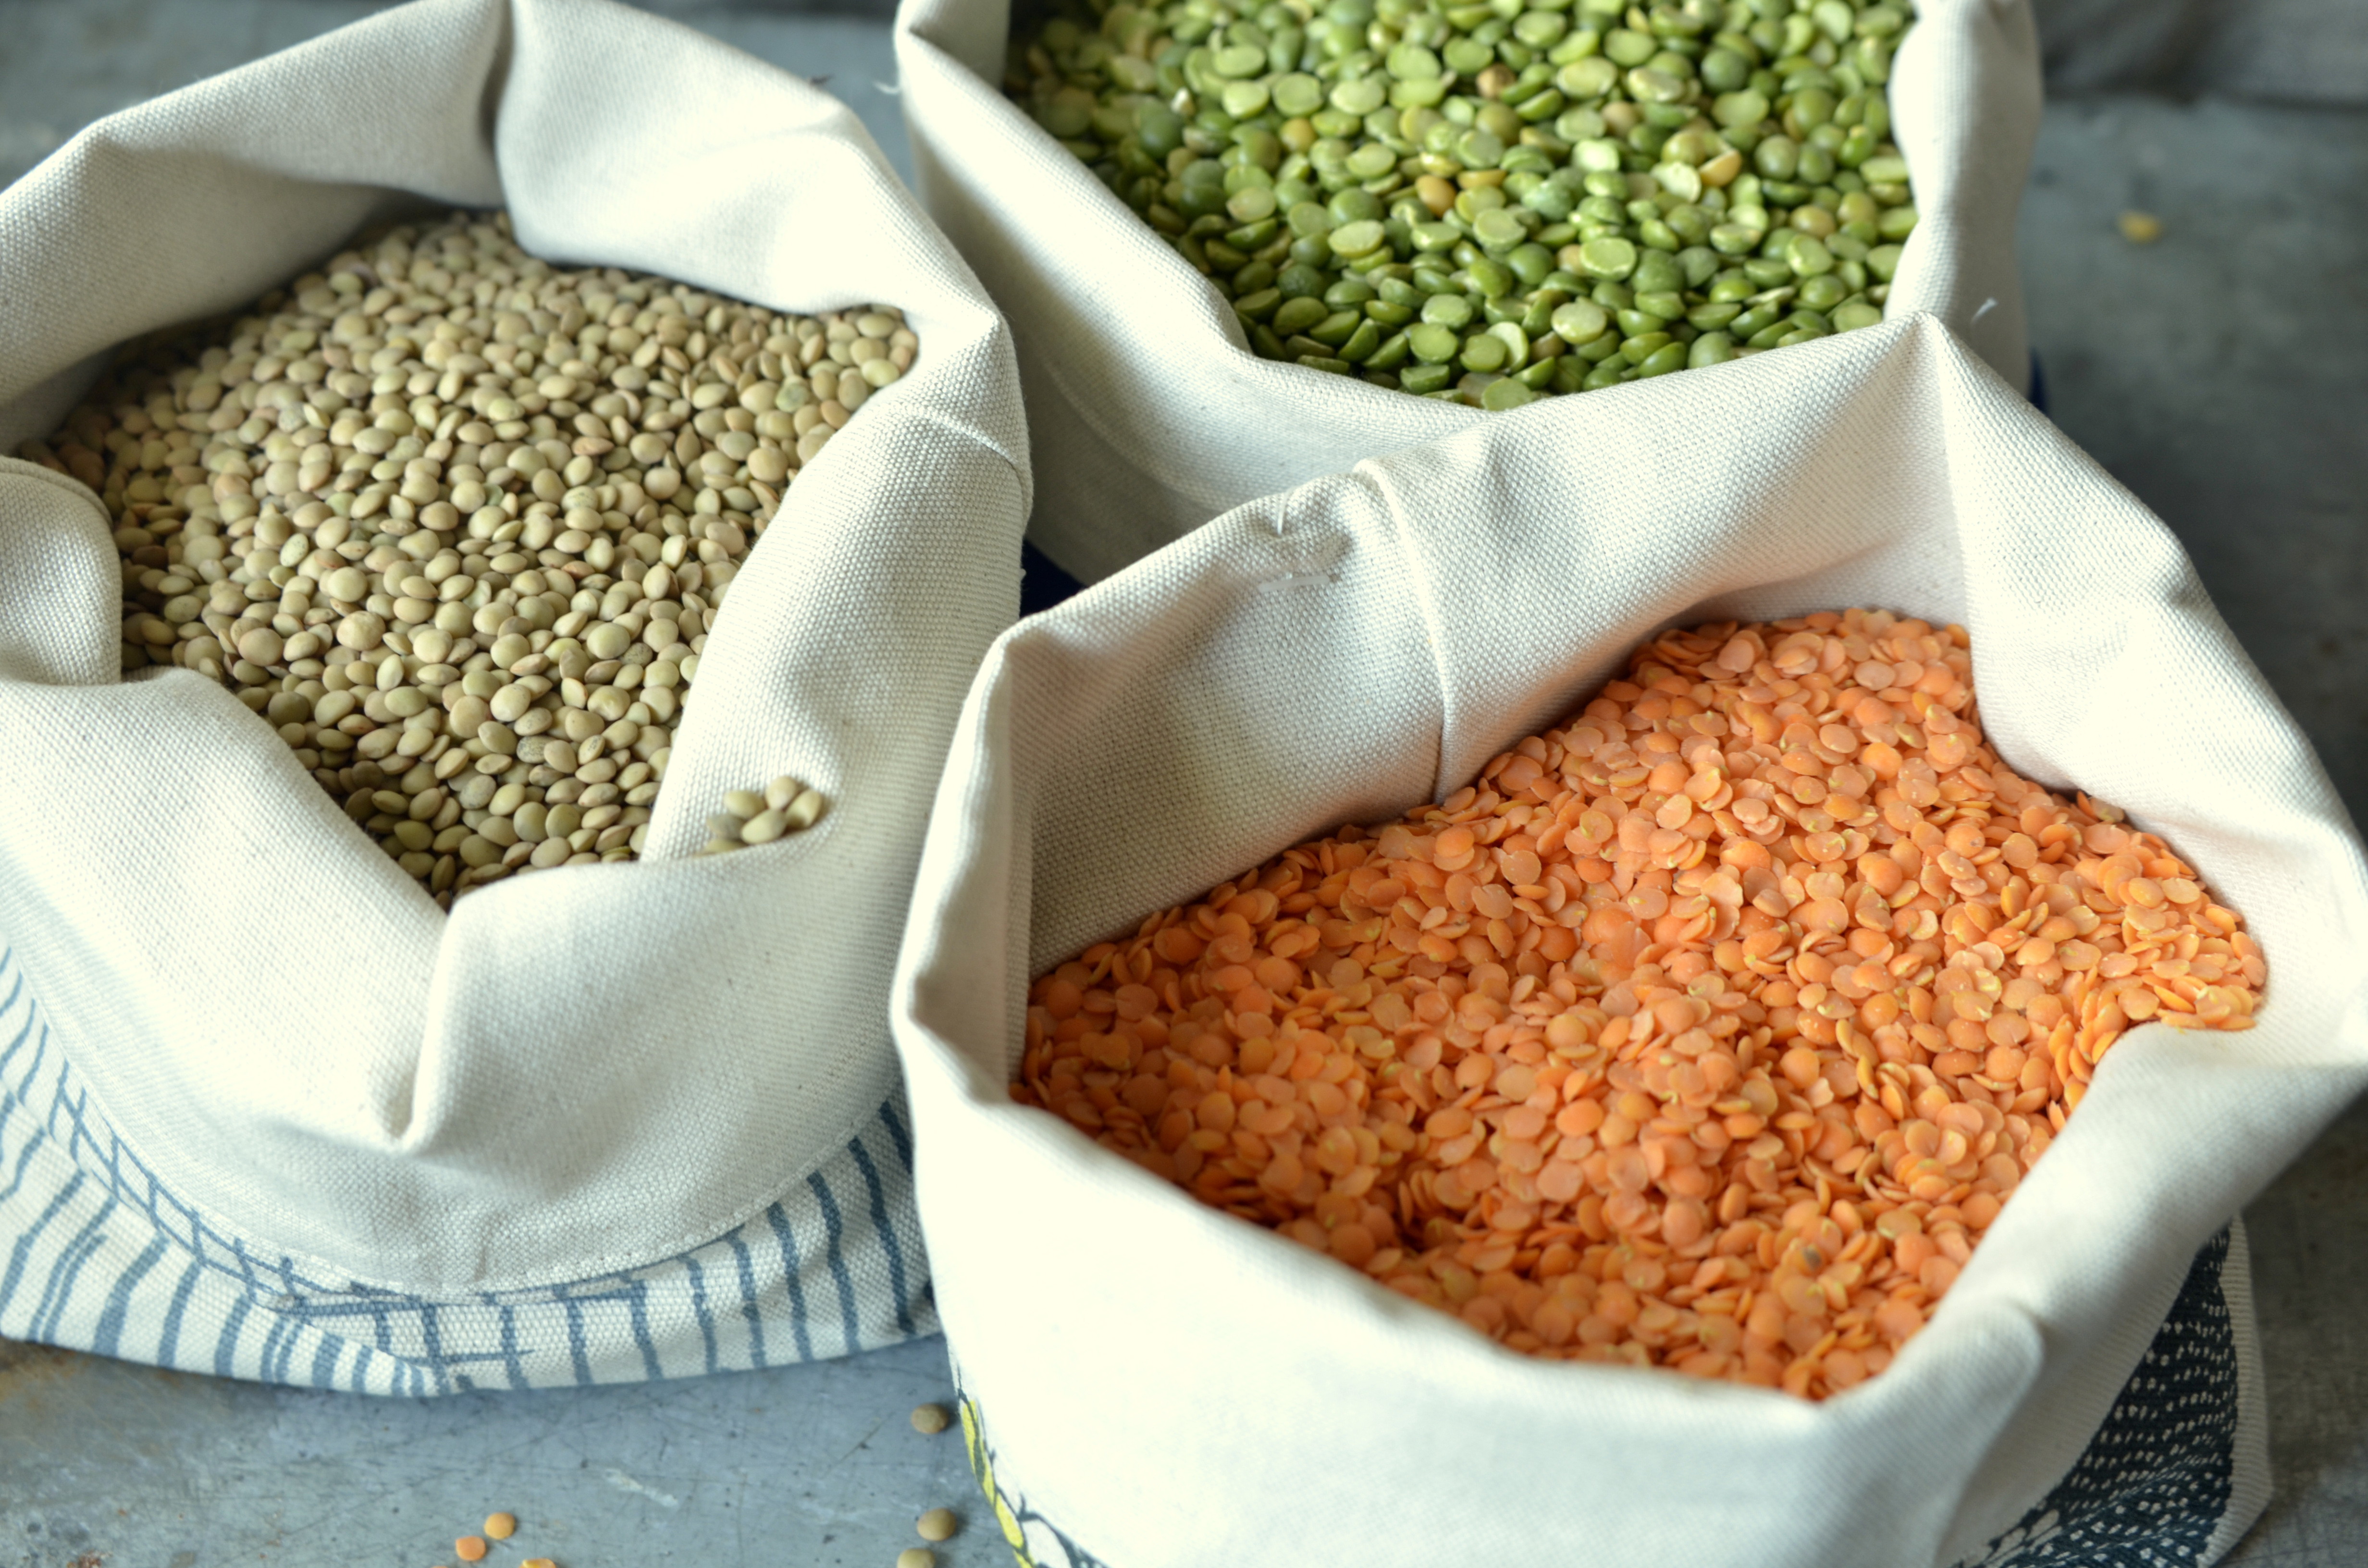 Bags of pulses for 2016 Year of the Pulses